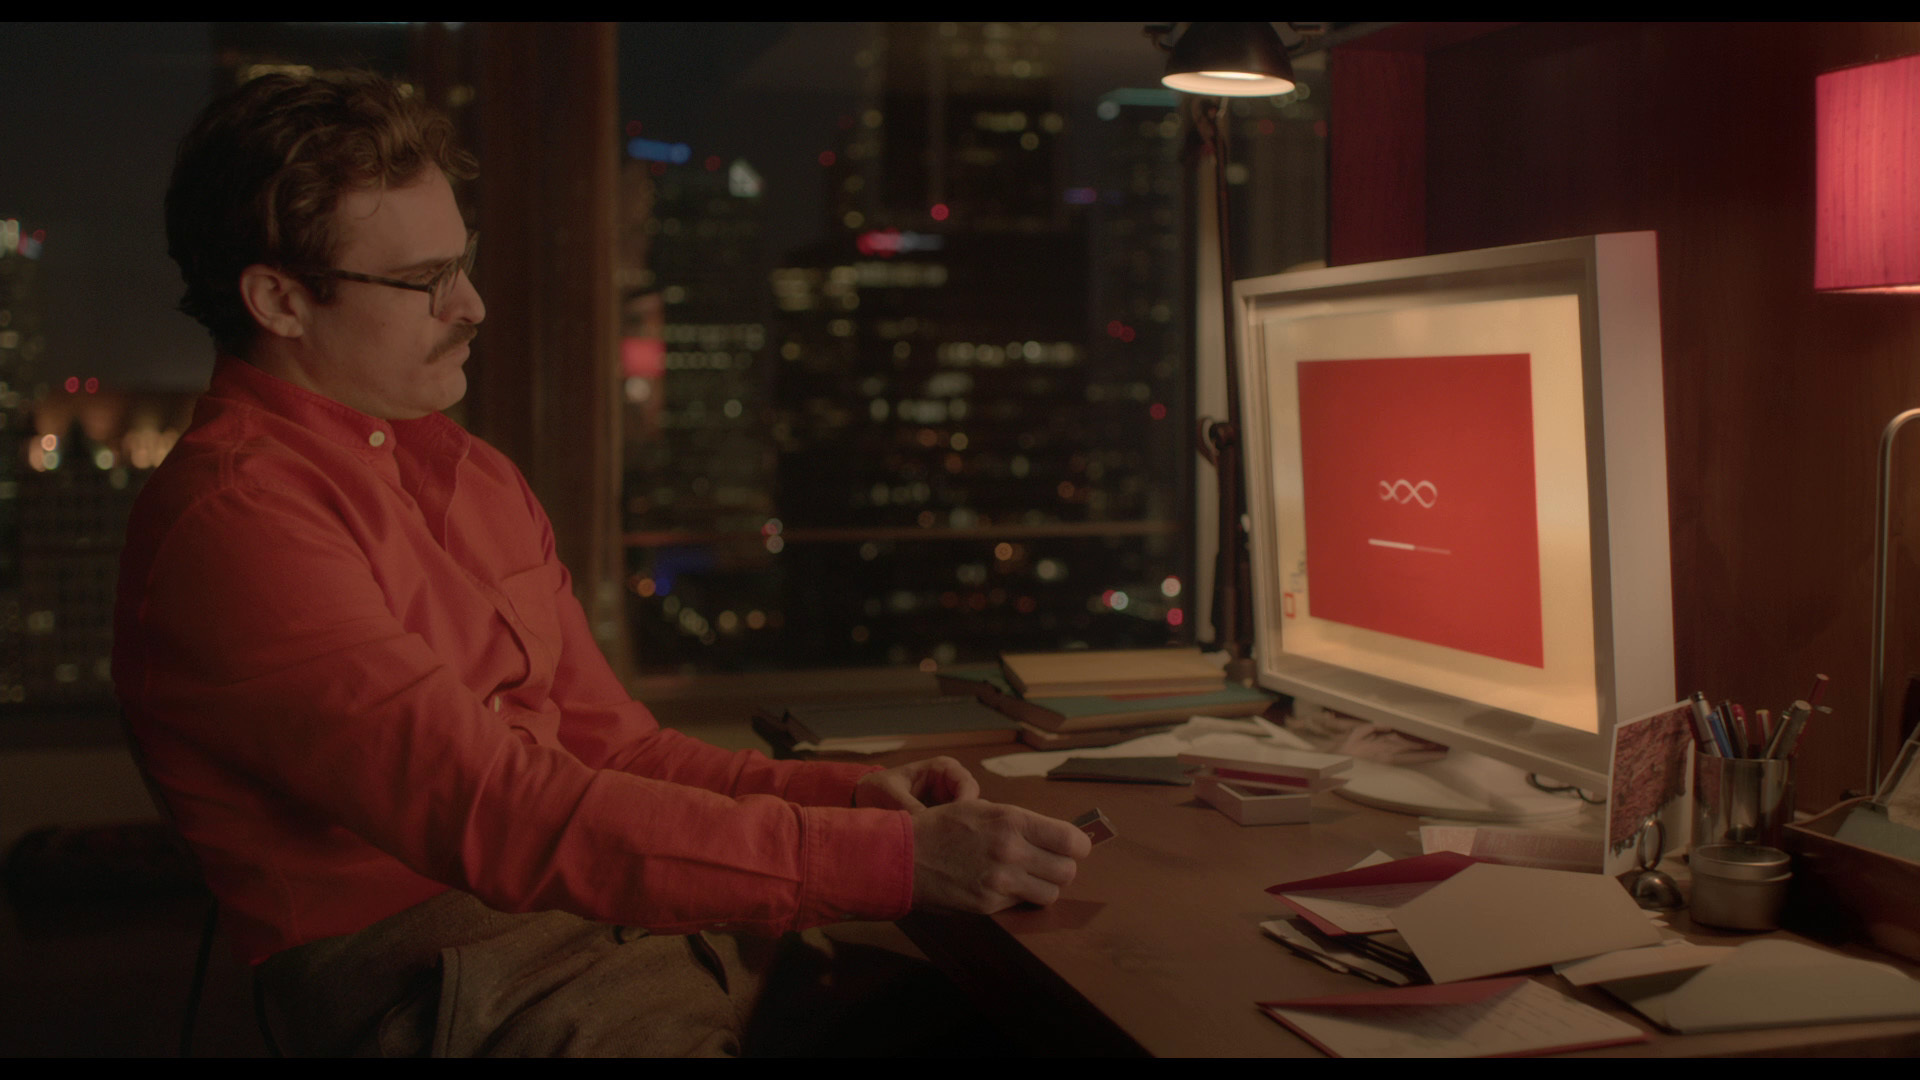 Protagonist of the movie Her, Theodore Twombly, at his desk.